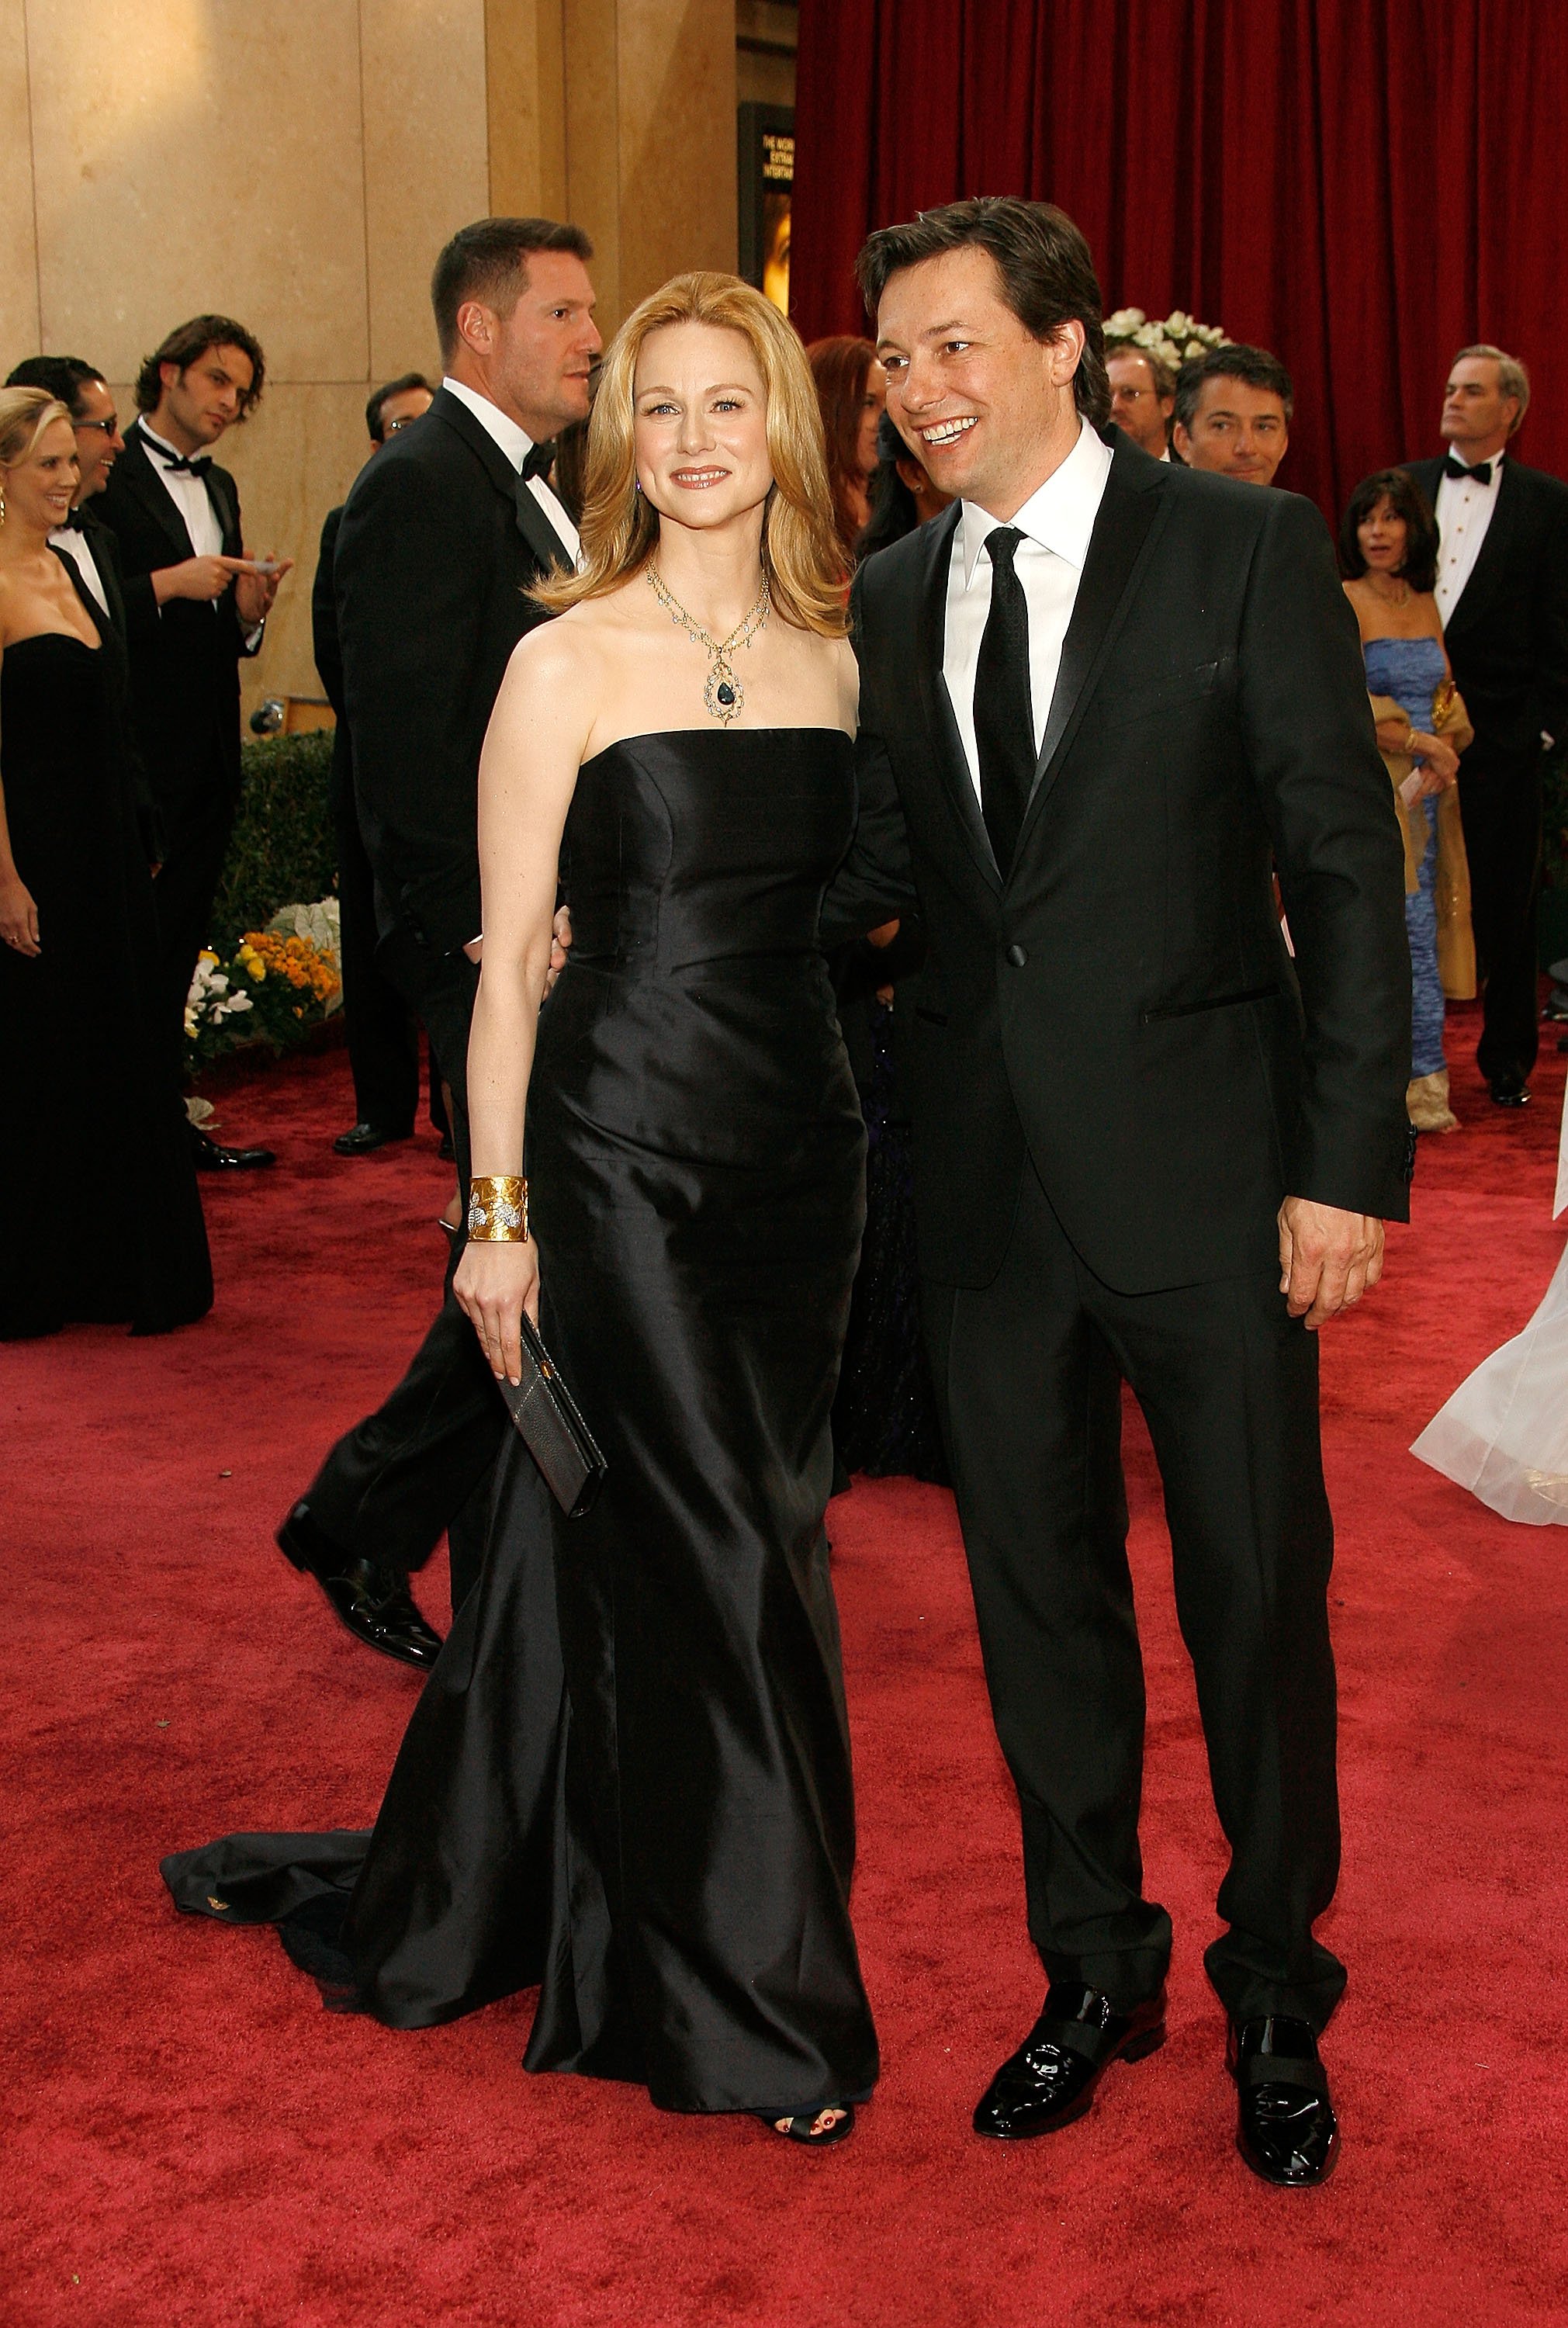 Laura Linney and Marc Schauer during the 80th Annual Academy Awards at the Kodak Theatre on February 24, 2008 in Hollywood, California. / Source: Getty Images